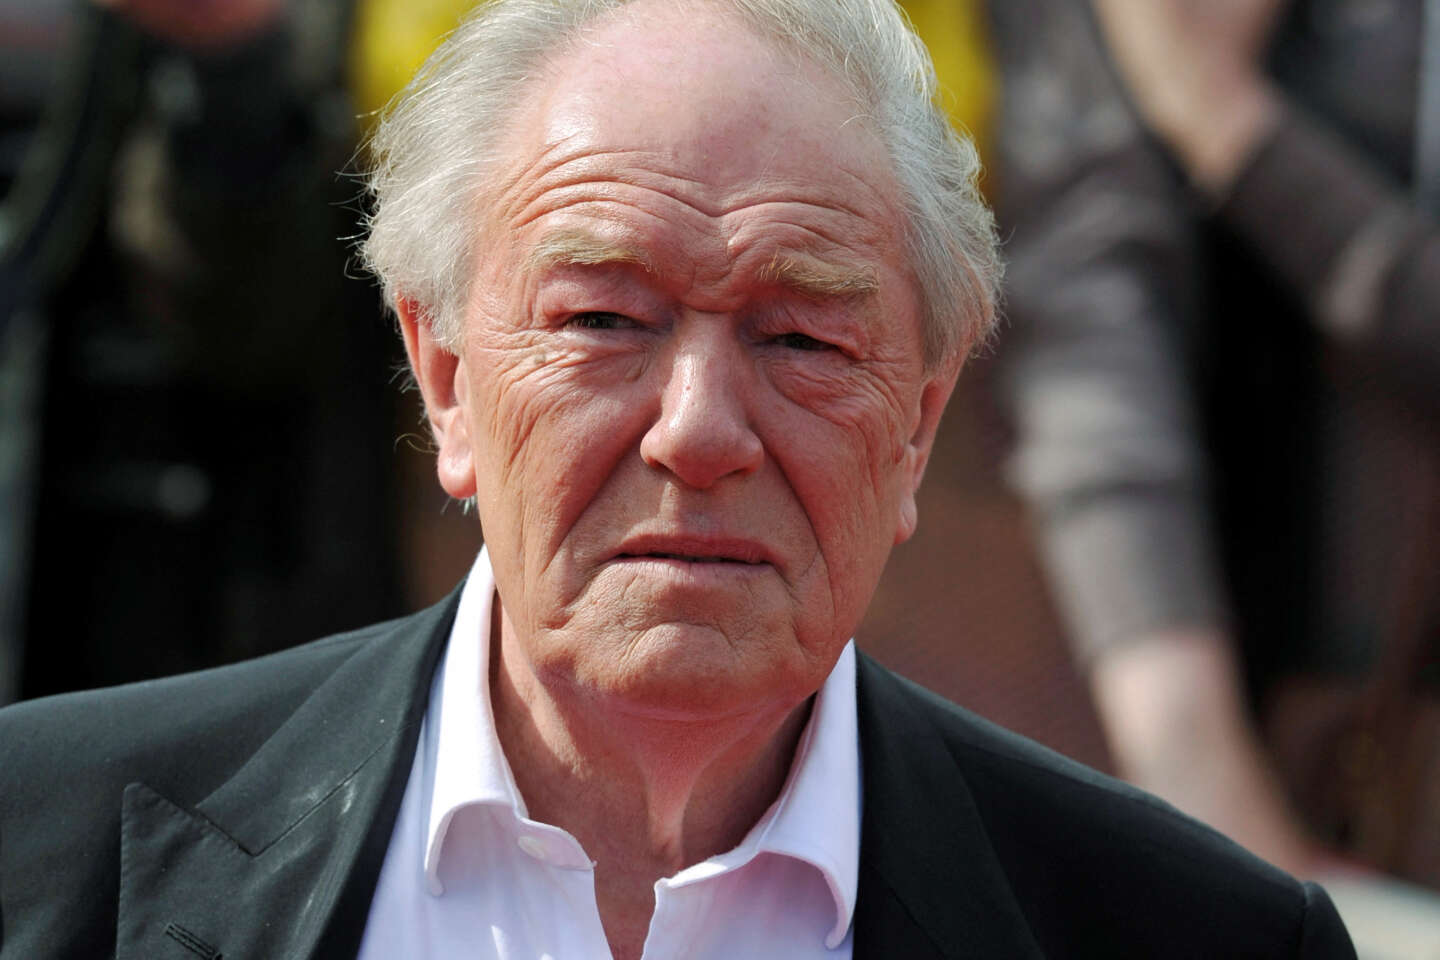 Actor Michael Gambon, best known for playing Dumbledore in the ‘Harry Potter’ films, has died.